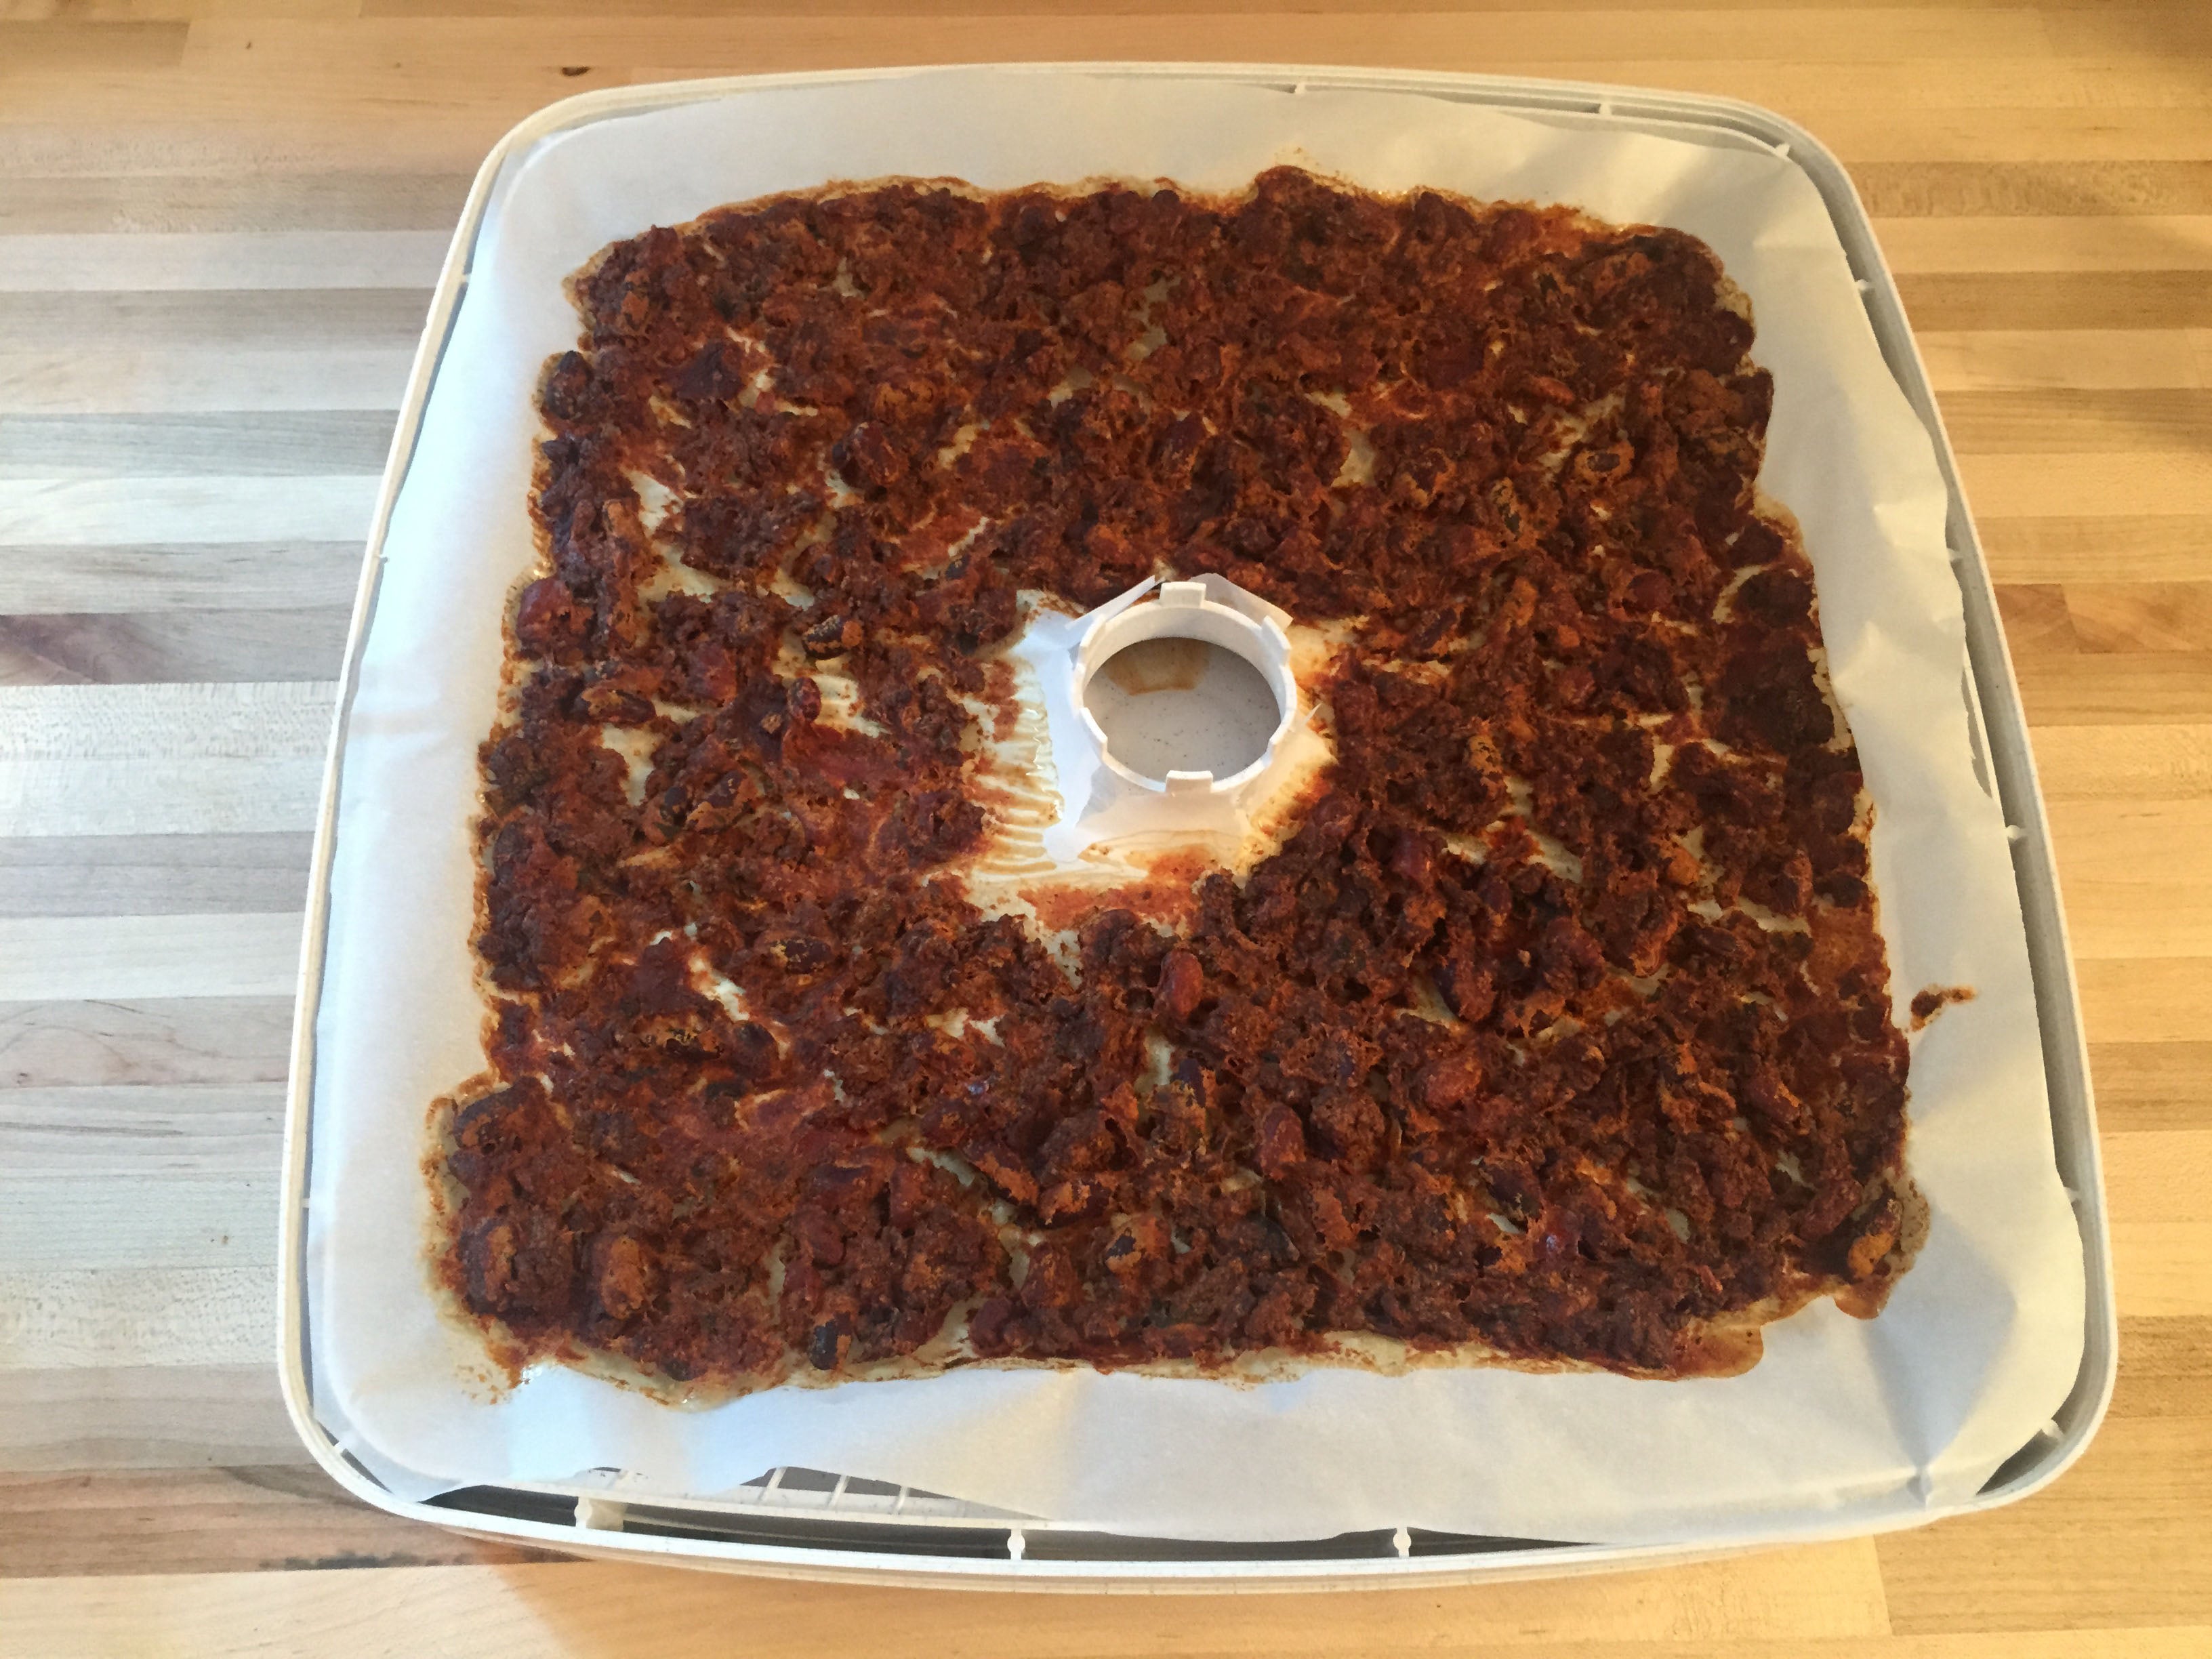 After dehydrating your homemade backpacking meal should be dry and brittle